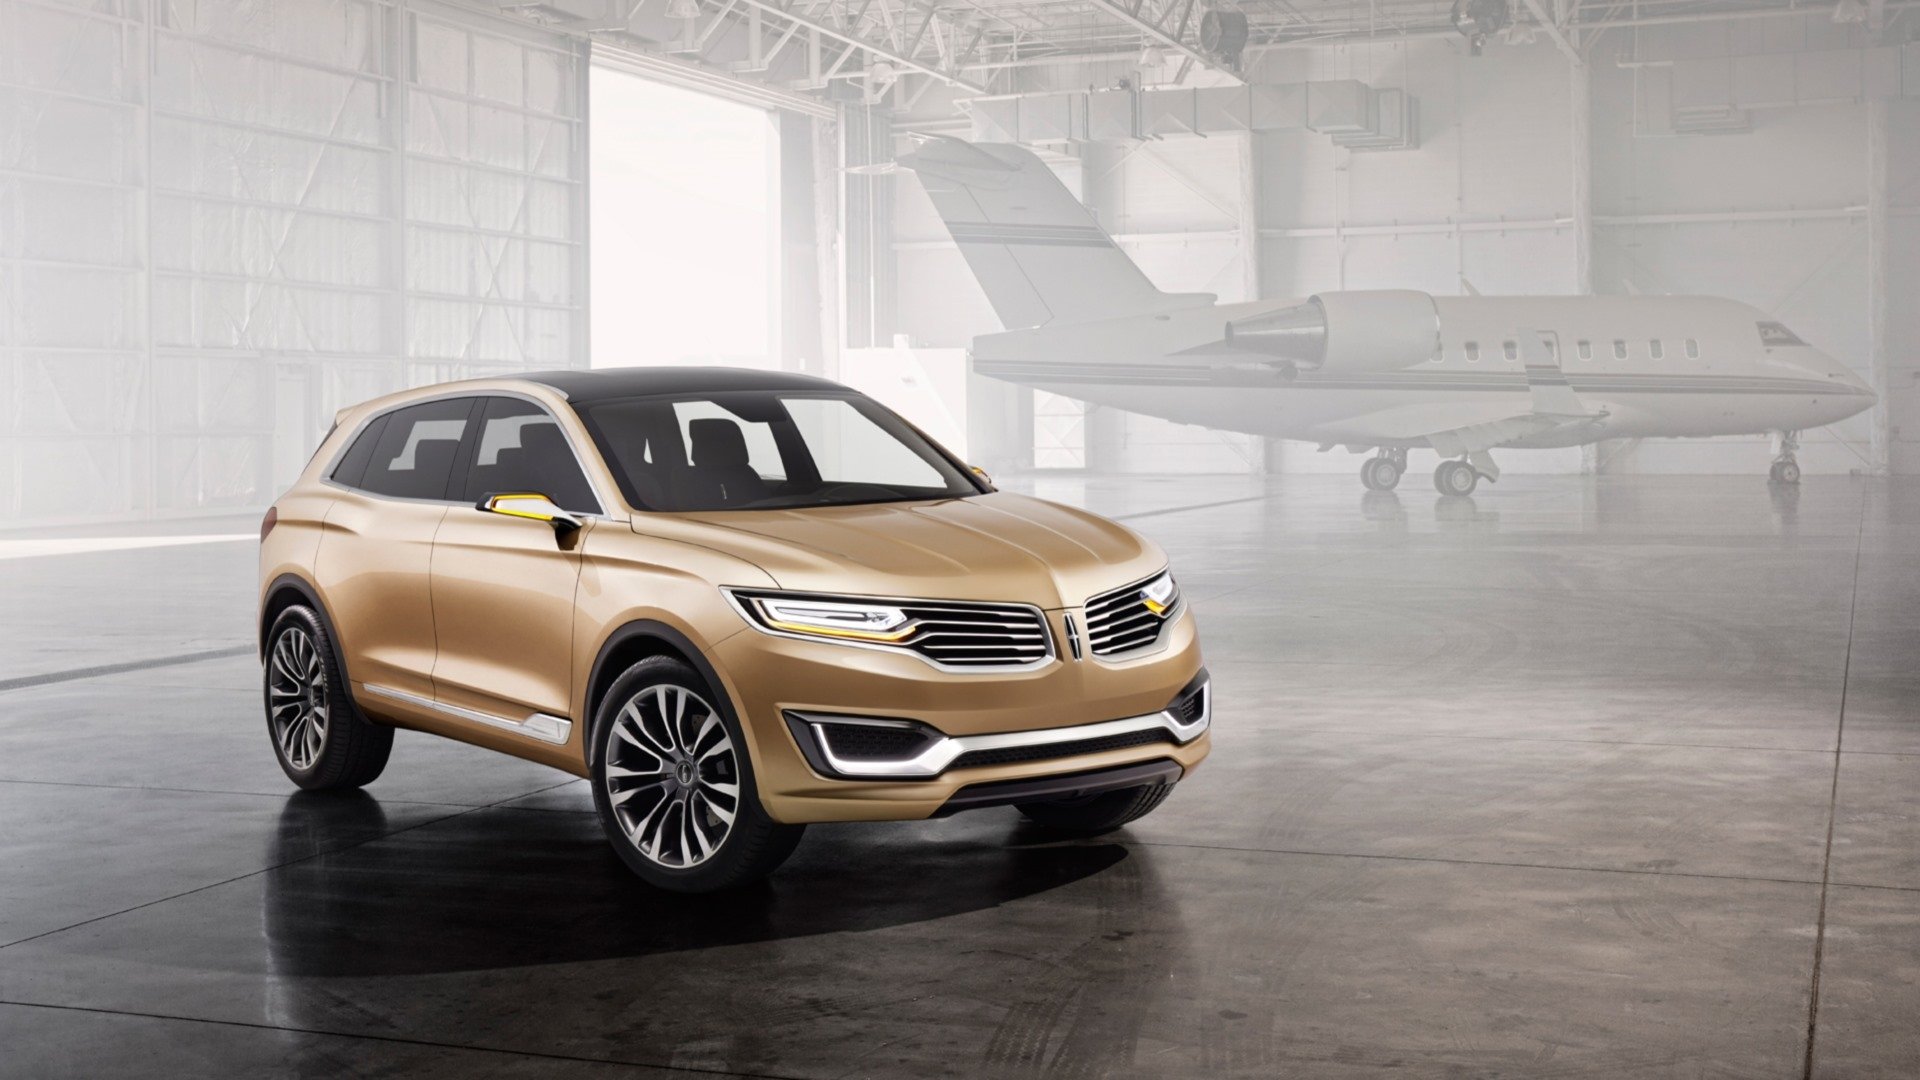 Download Vehicle Lincoln MKC  HD Wallpaper